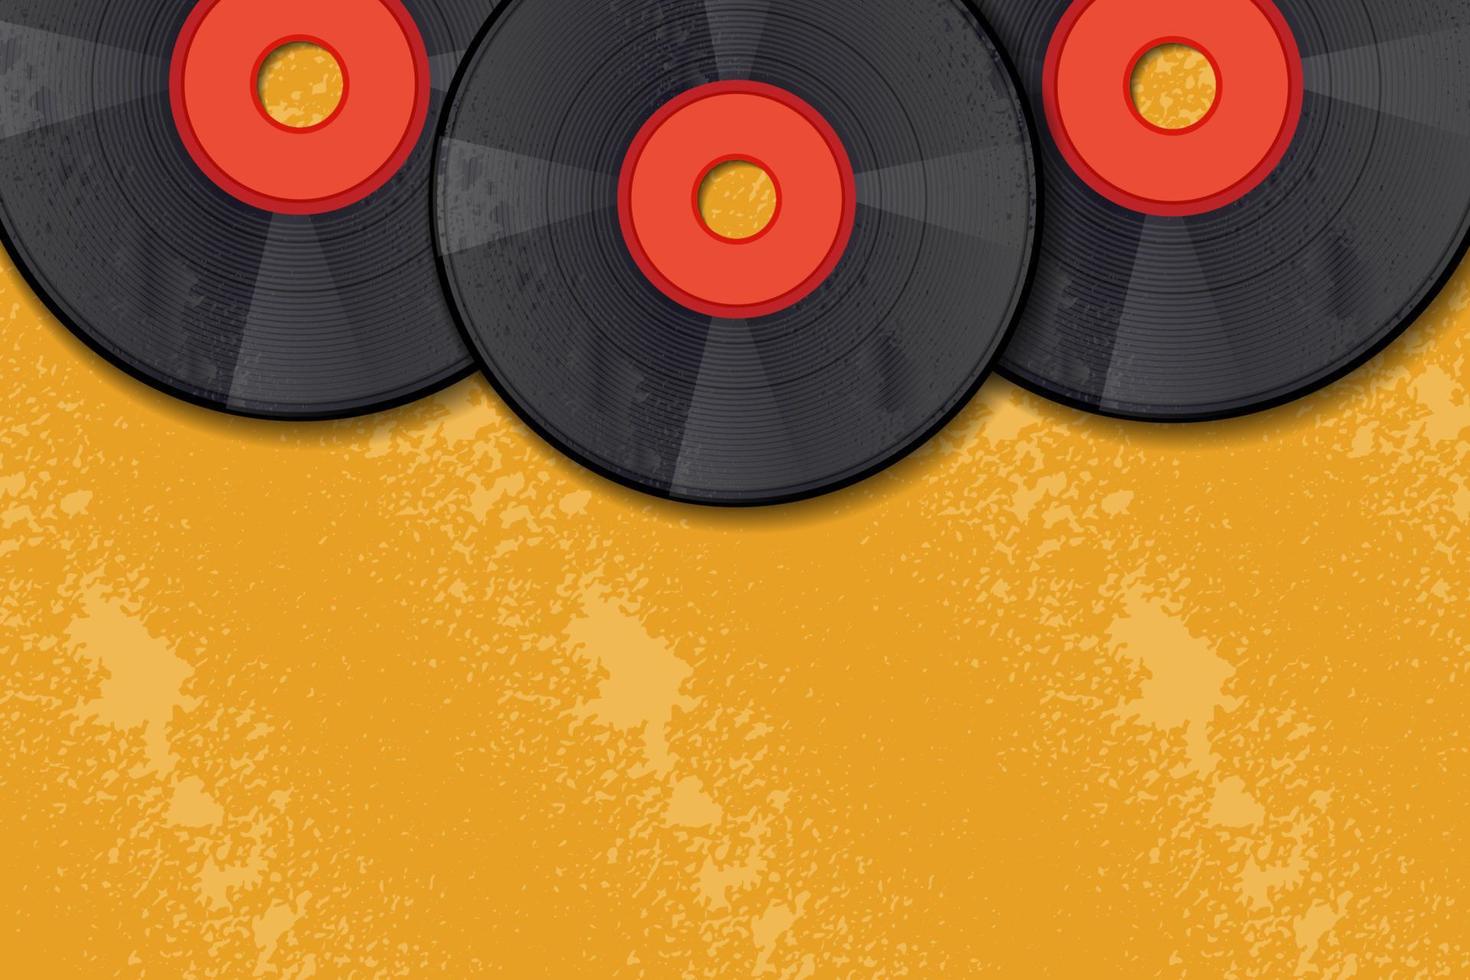 Vinyl Record Music design template background with vinyl record vintage retro style vector